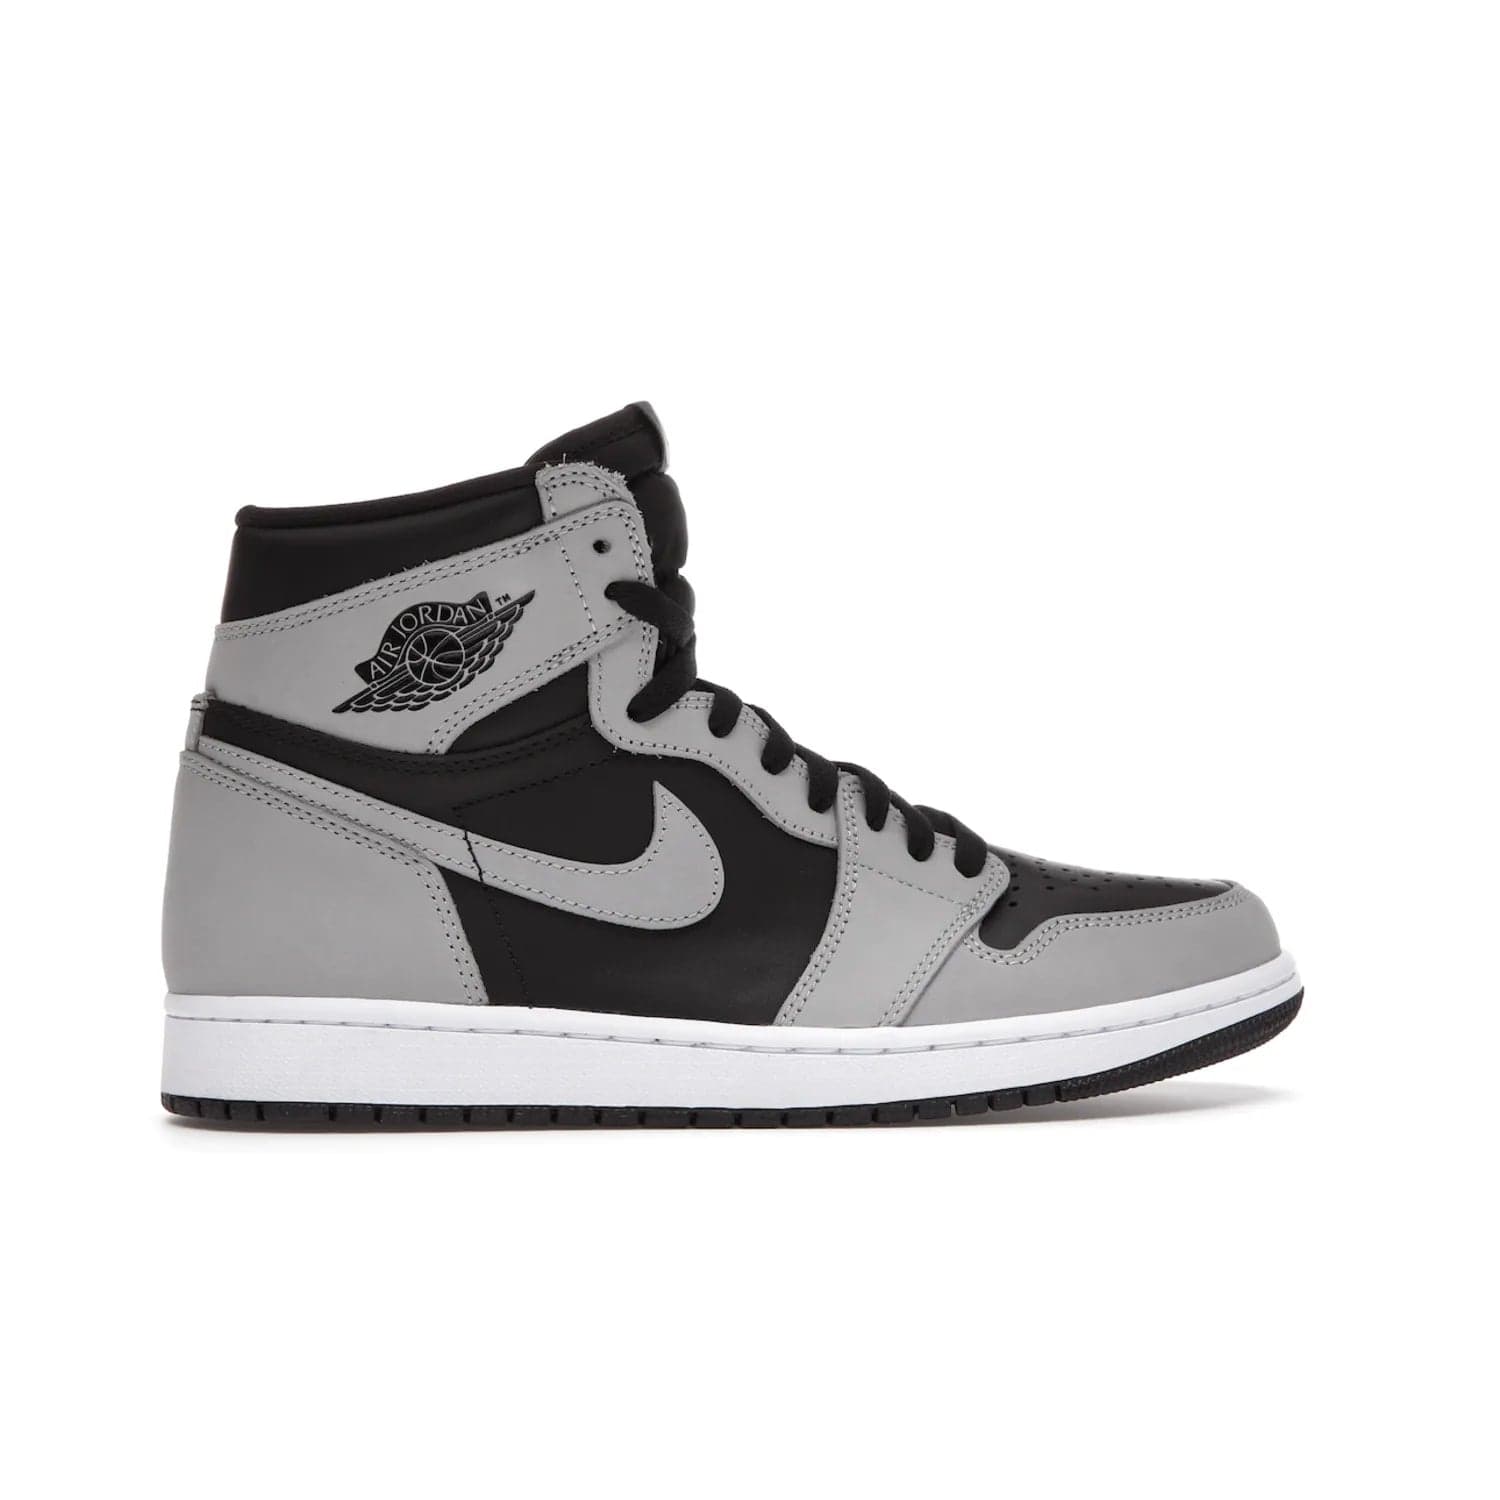 Jordan 1 Retro High Shadow 2.0 - Image 36 - Only at www.BallersClubKickz.com - #
Classic Air Jordan 1 Retro High Shadow 2.0 with black leather base and Light Smoke Grey overlays. Released in May 2021.